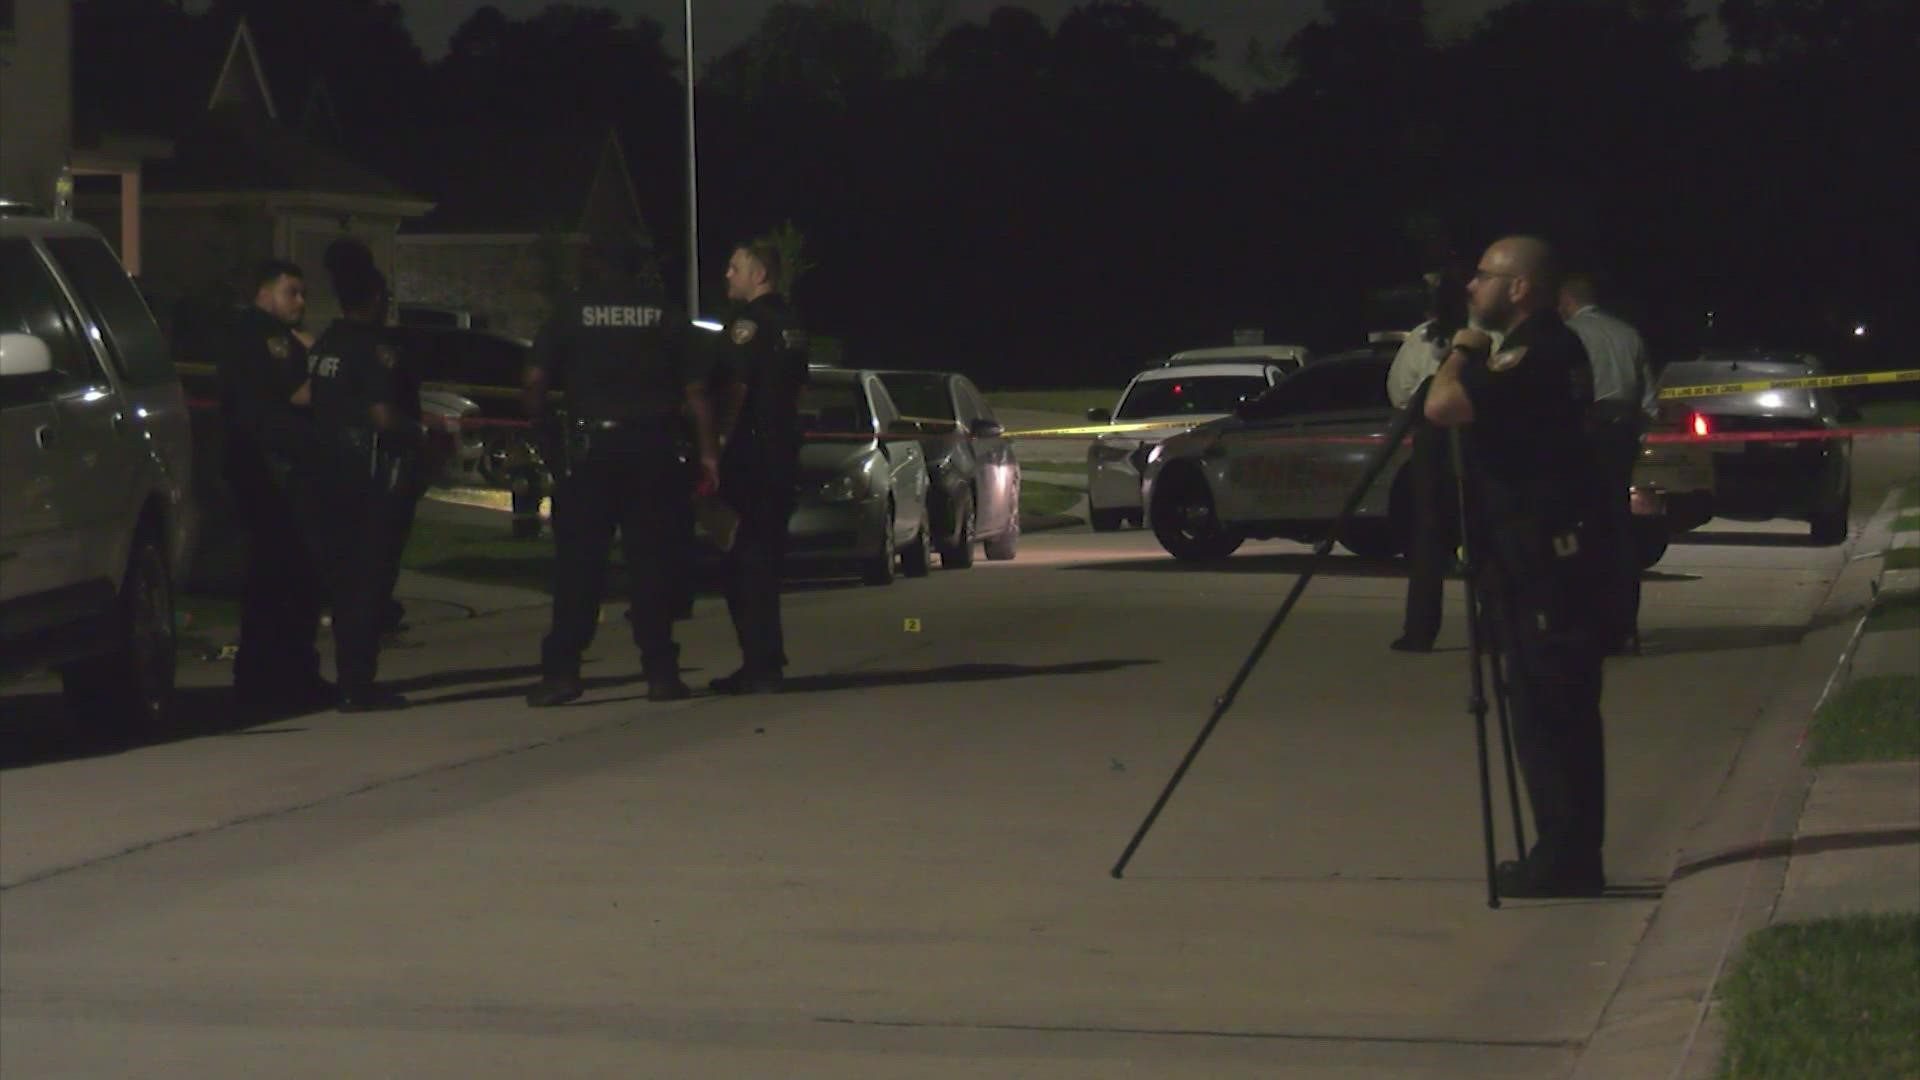 At least four means took off after the shooting on Atascocita Plum Court overnight.